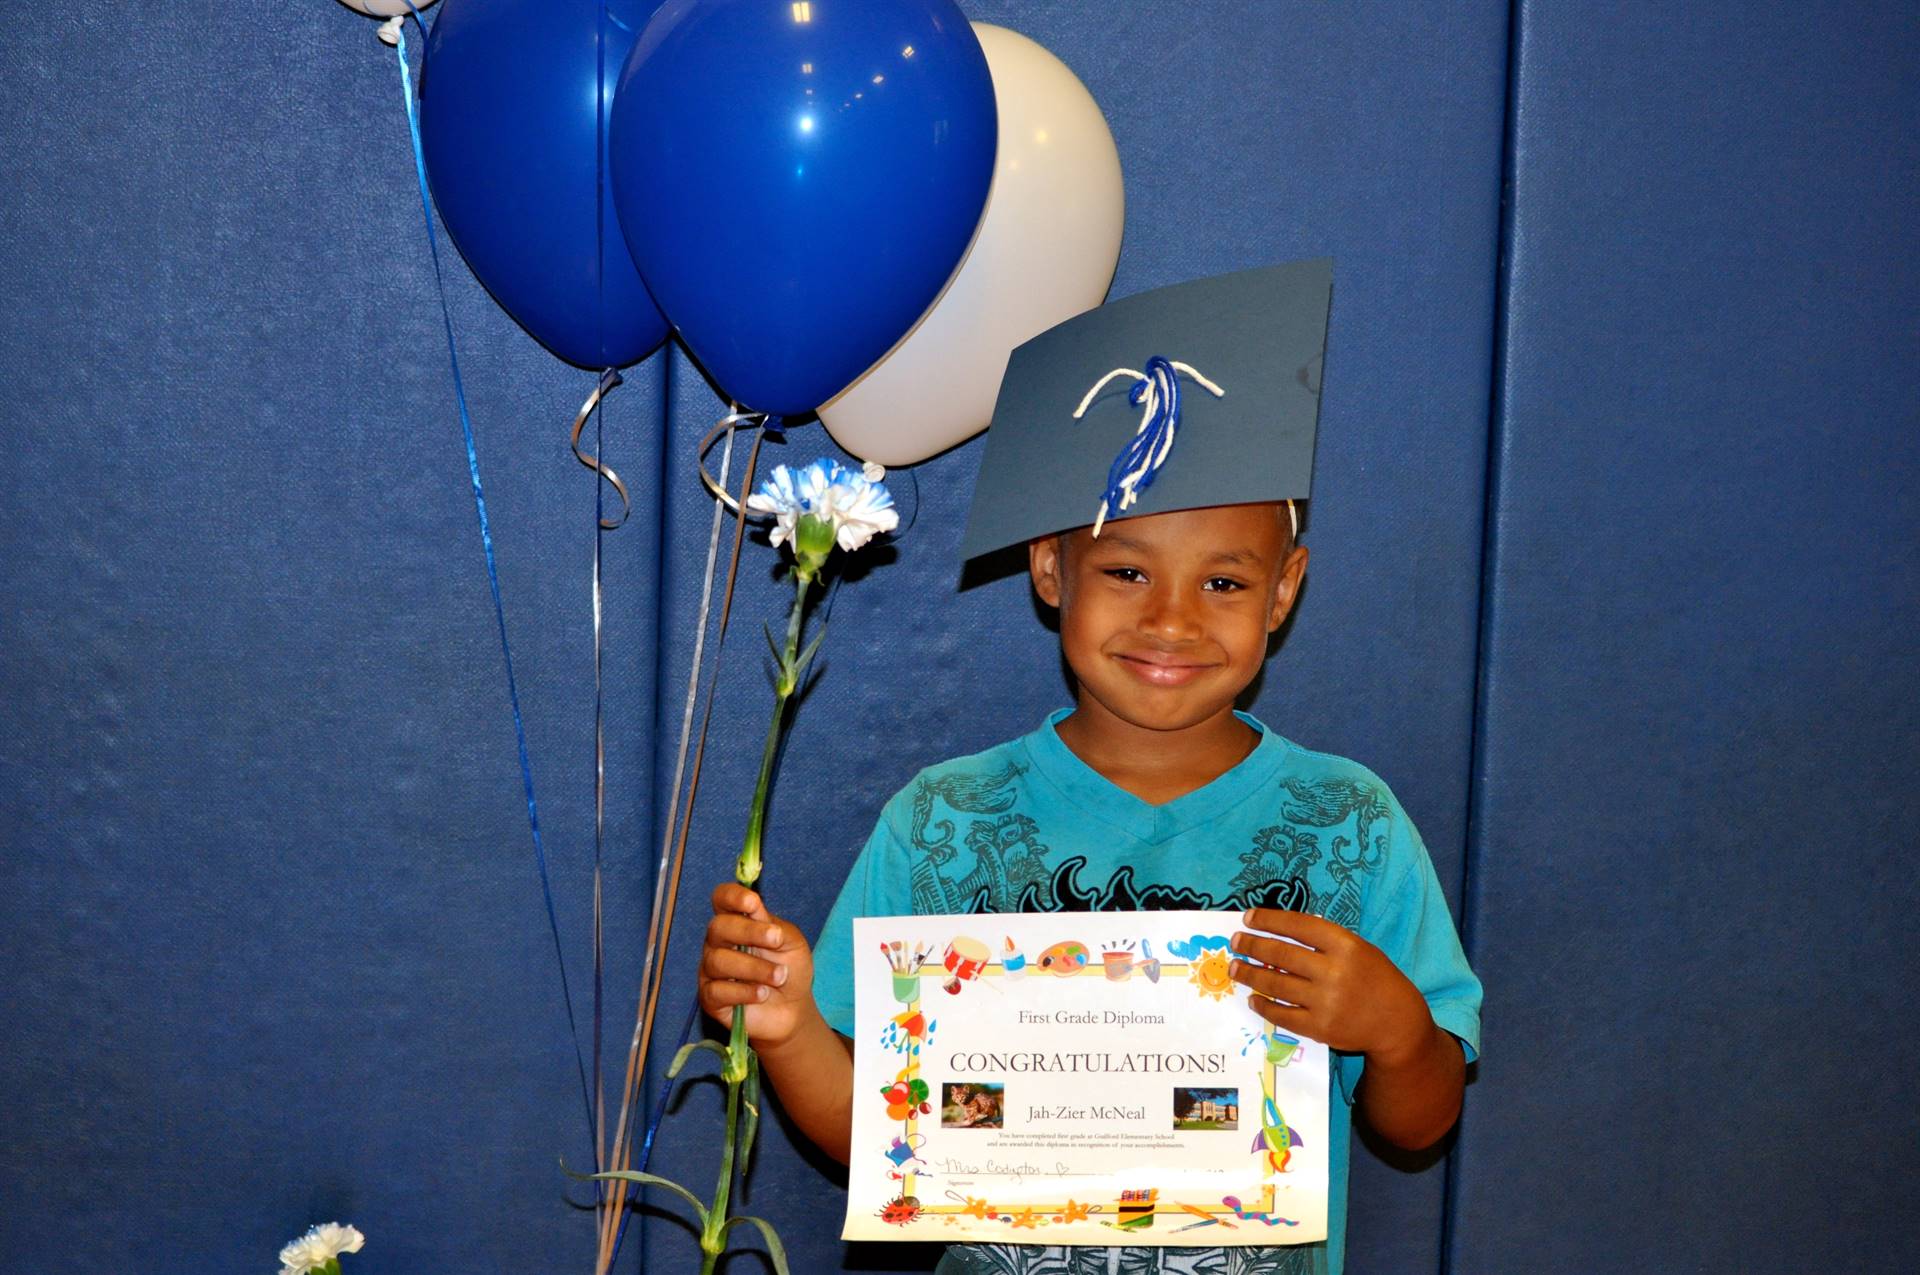 A student holds balloons to celebrate after the graduation ceremony.